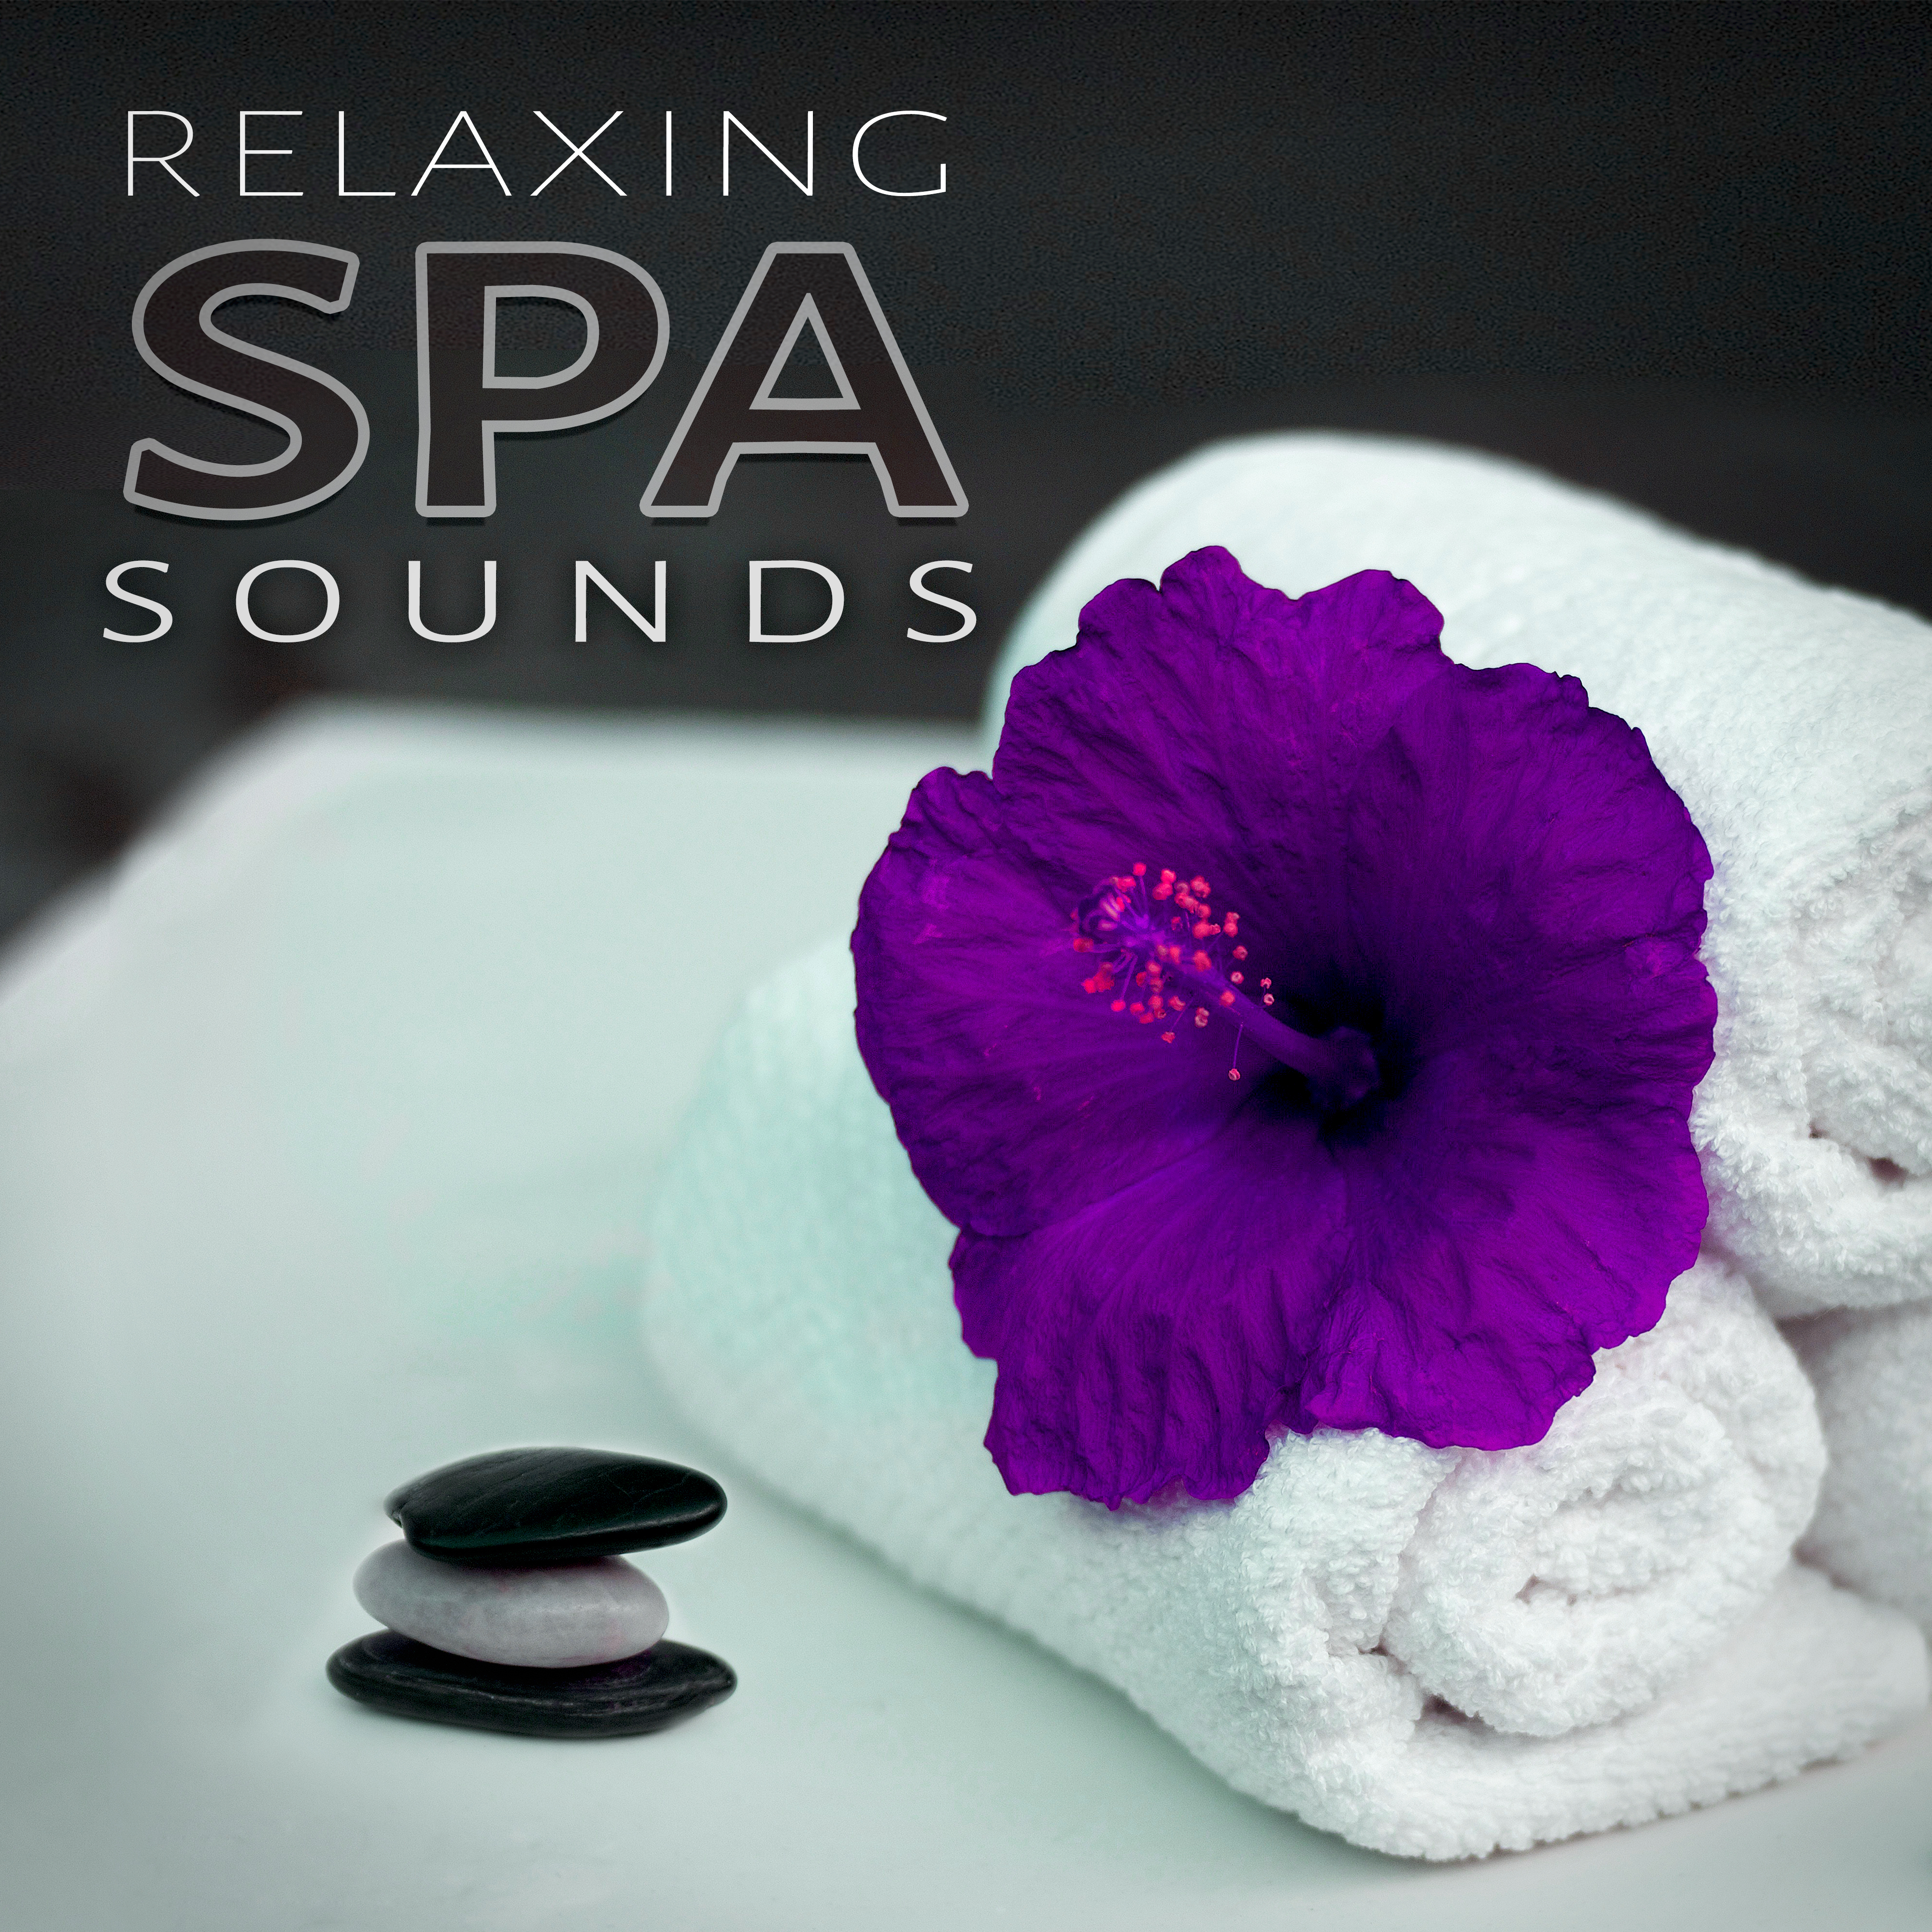 Relaxing Spa Sounds - Calm Nature Sounds and Spa Dreams for Relaxation, Meditation, Massage, Yoga, Reiki & Wellbeing